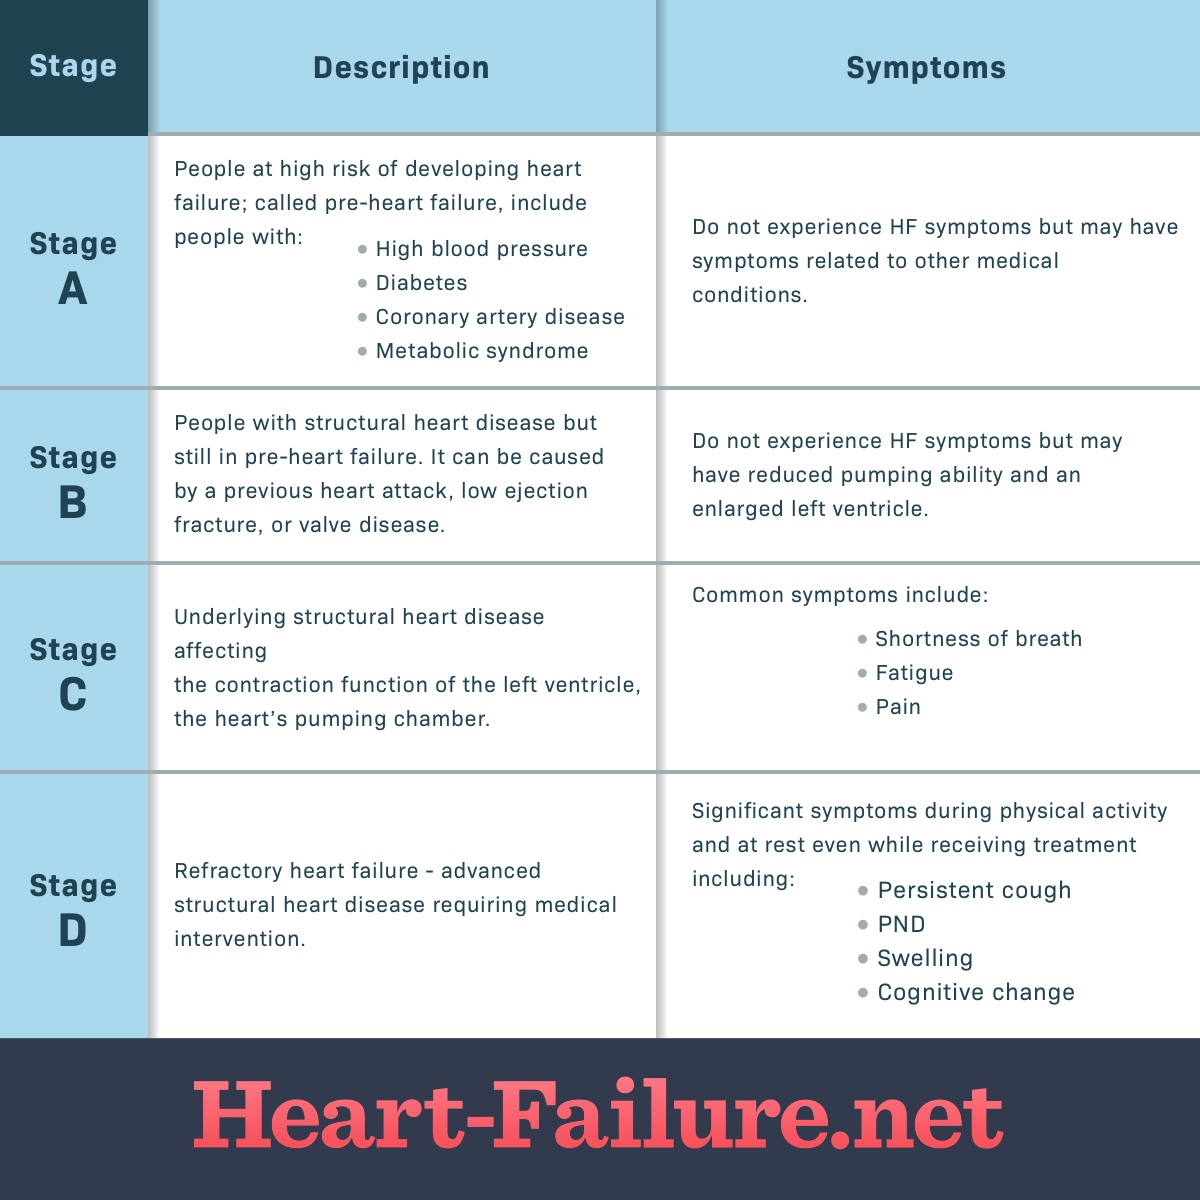 A chart showing the symptoms heart failure by stage